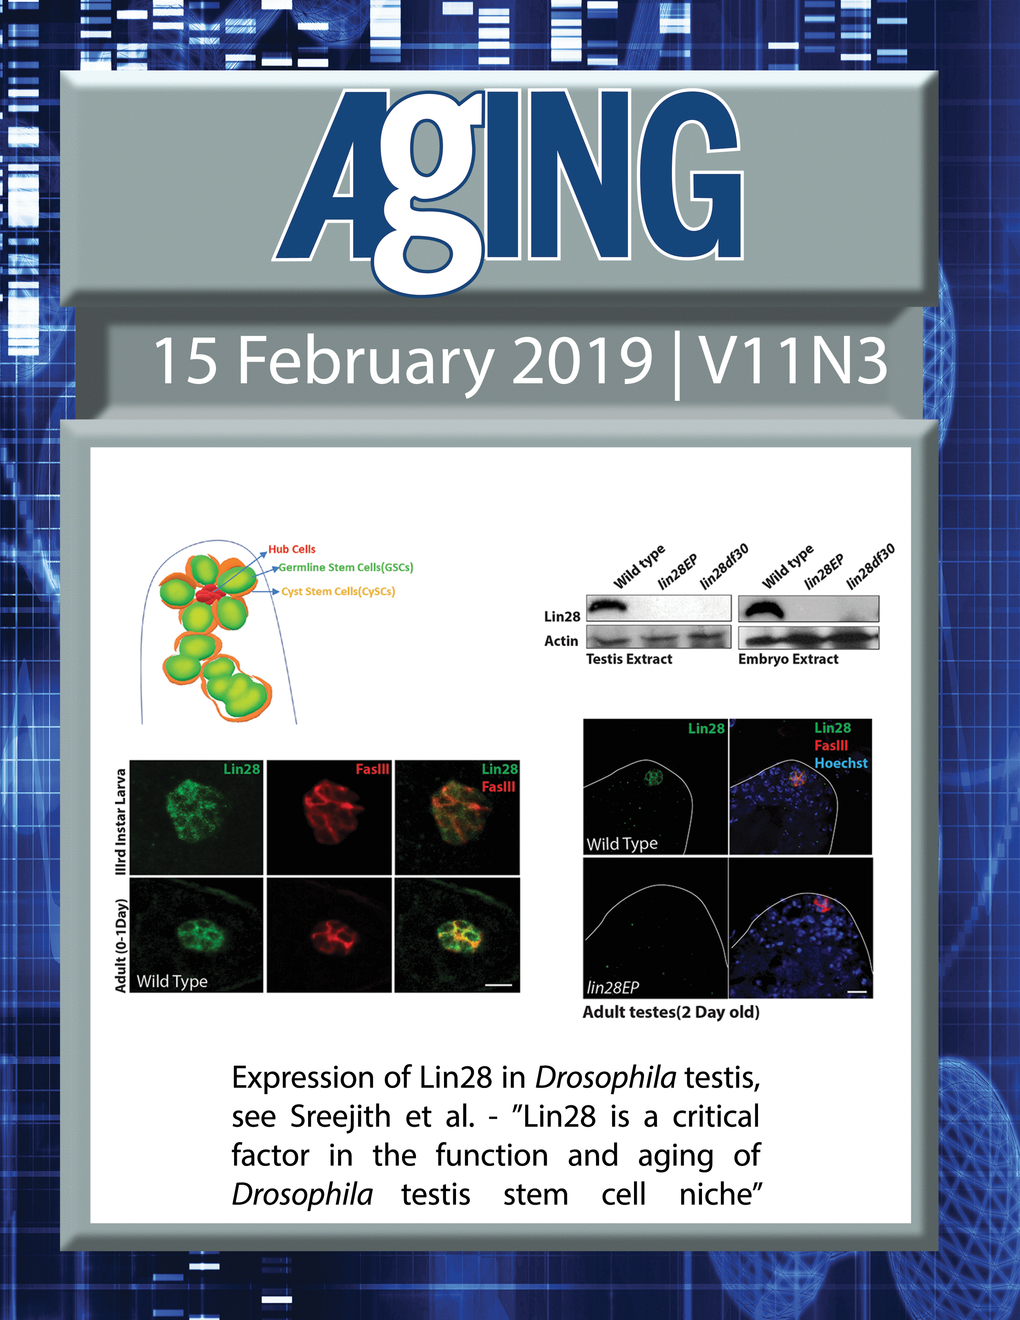 The cover features Figure 1 "Expression of Lin28 in Drosophila testis" from Sreejith et al.